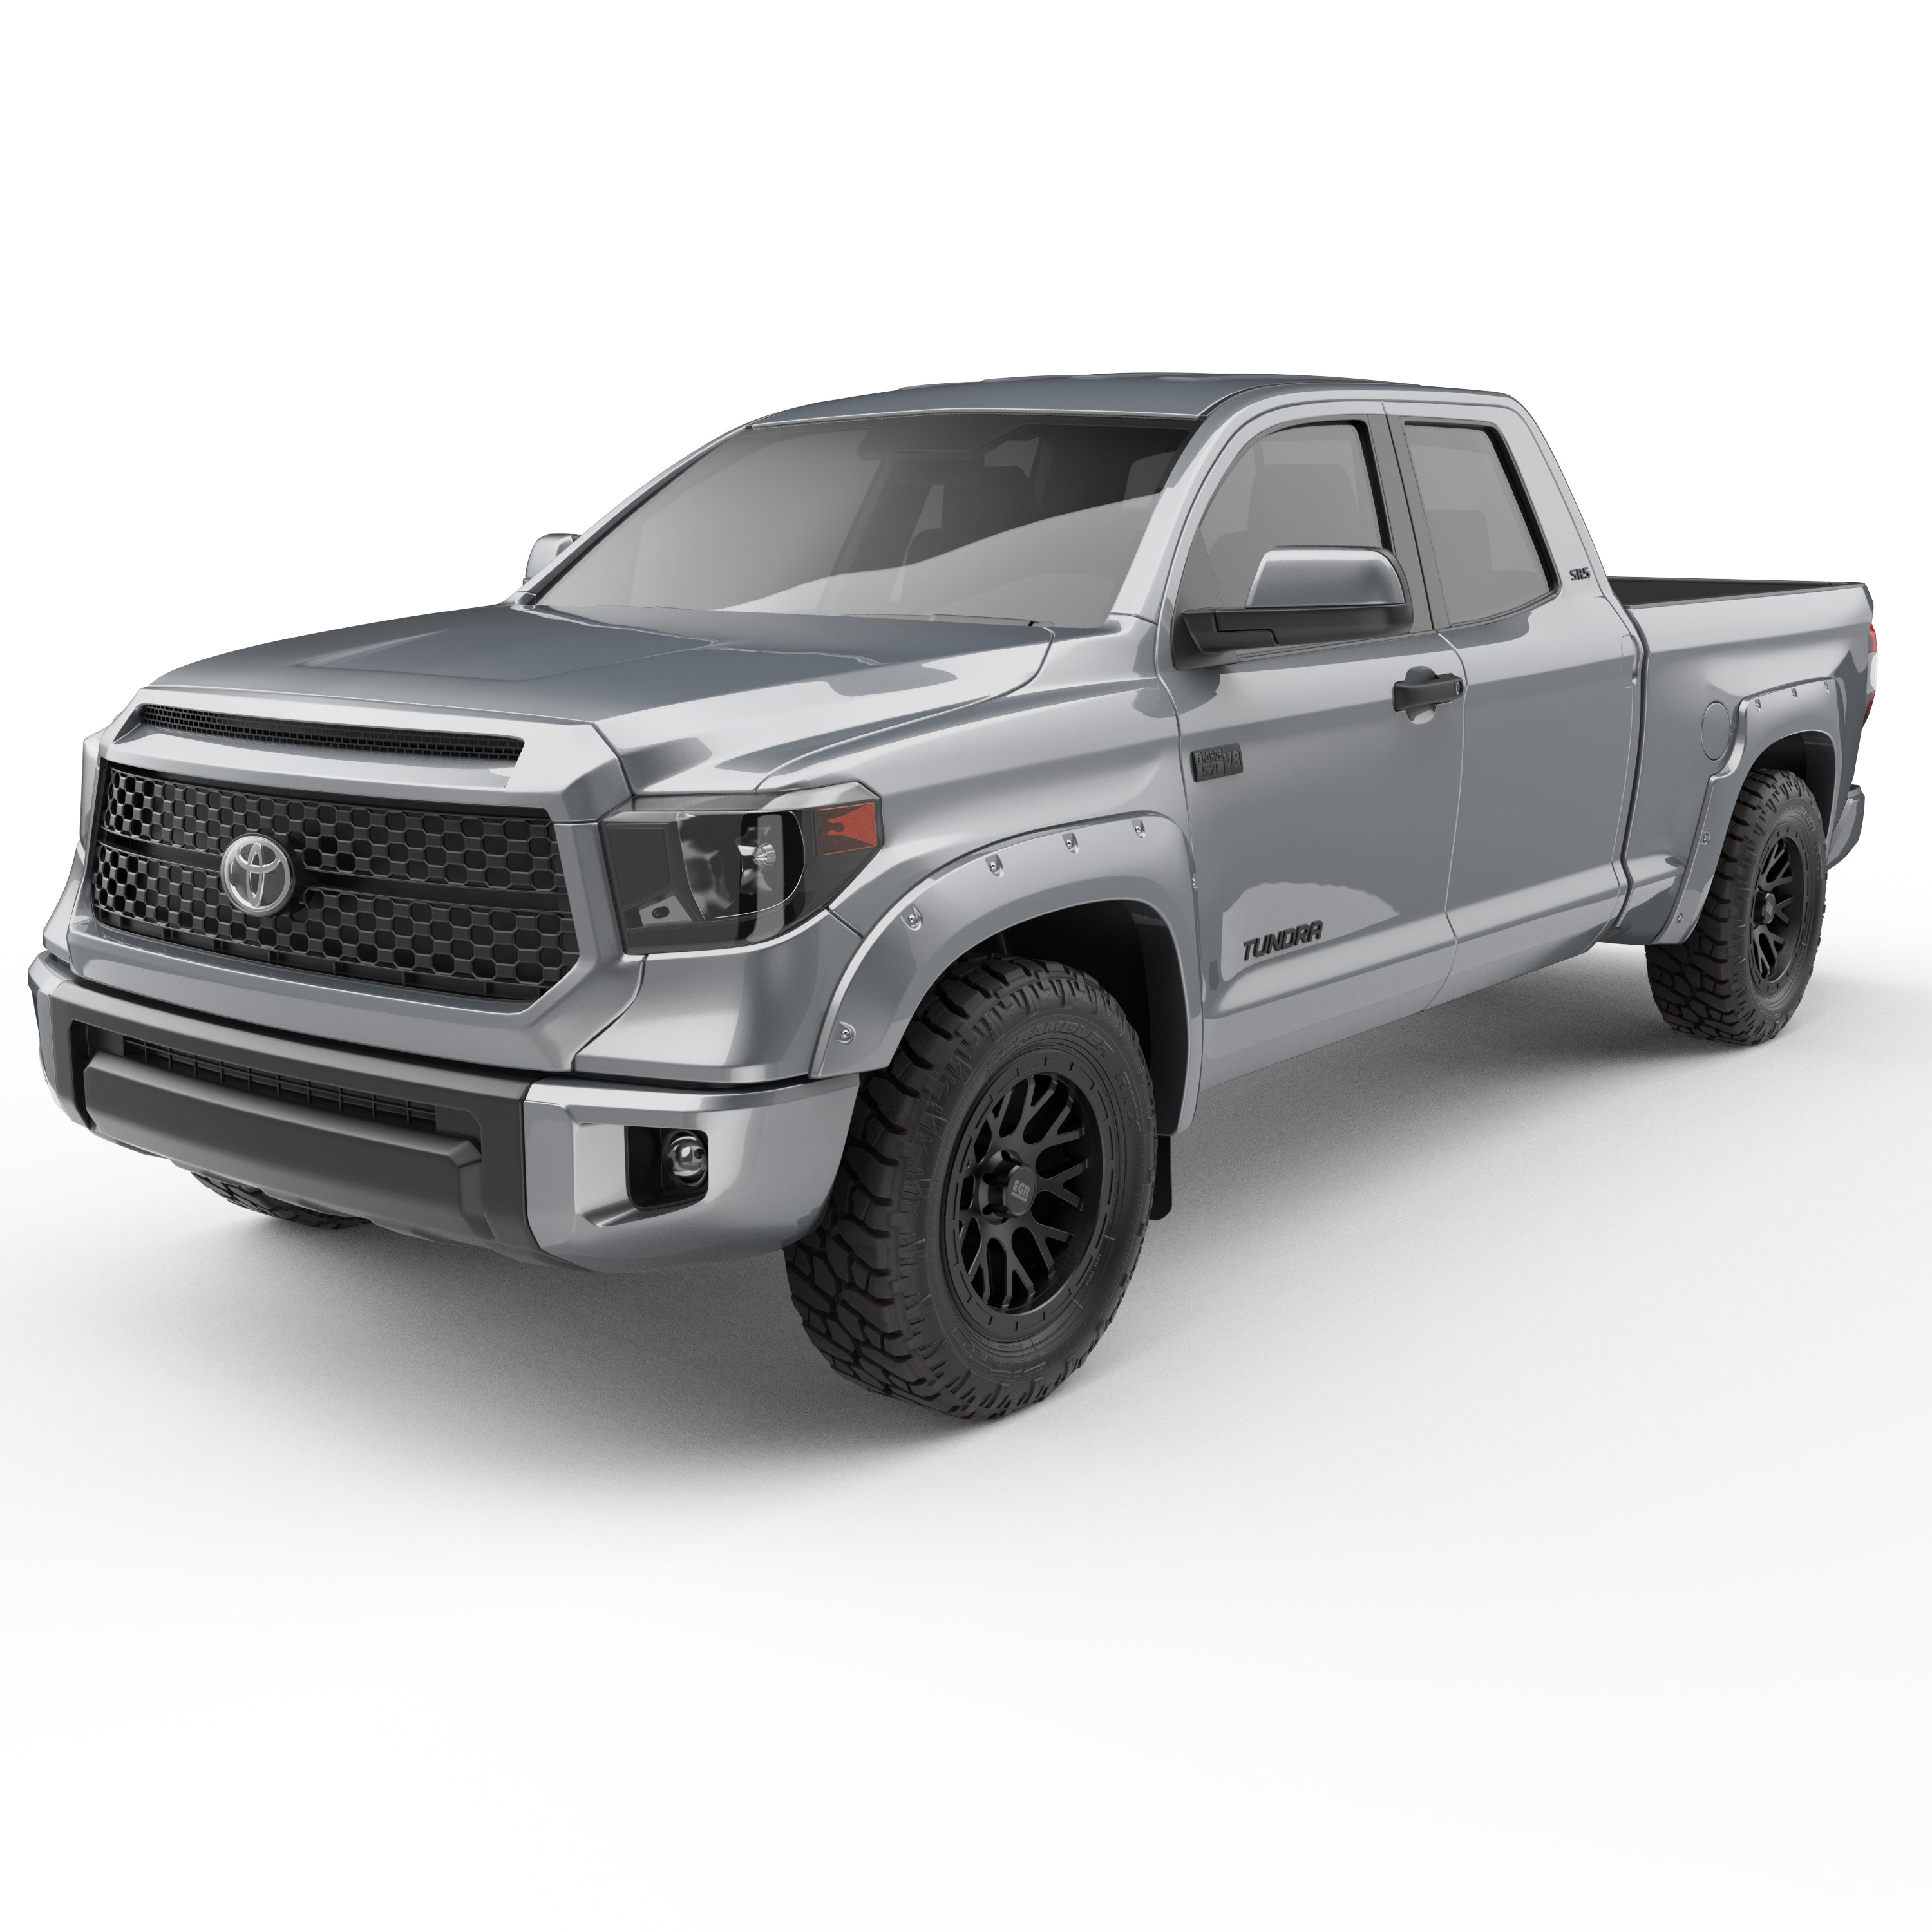 EGR 2014-2021 Toyota Tundra 2 & 4 Door Crew Cab Standard Cab Extended Cab Pickup Traditional Bolt-on look Fender Flares set of 4 Painted to Code Silver 795494-1D6